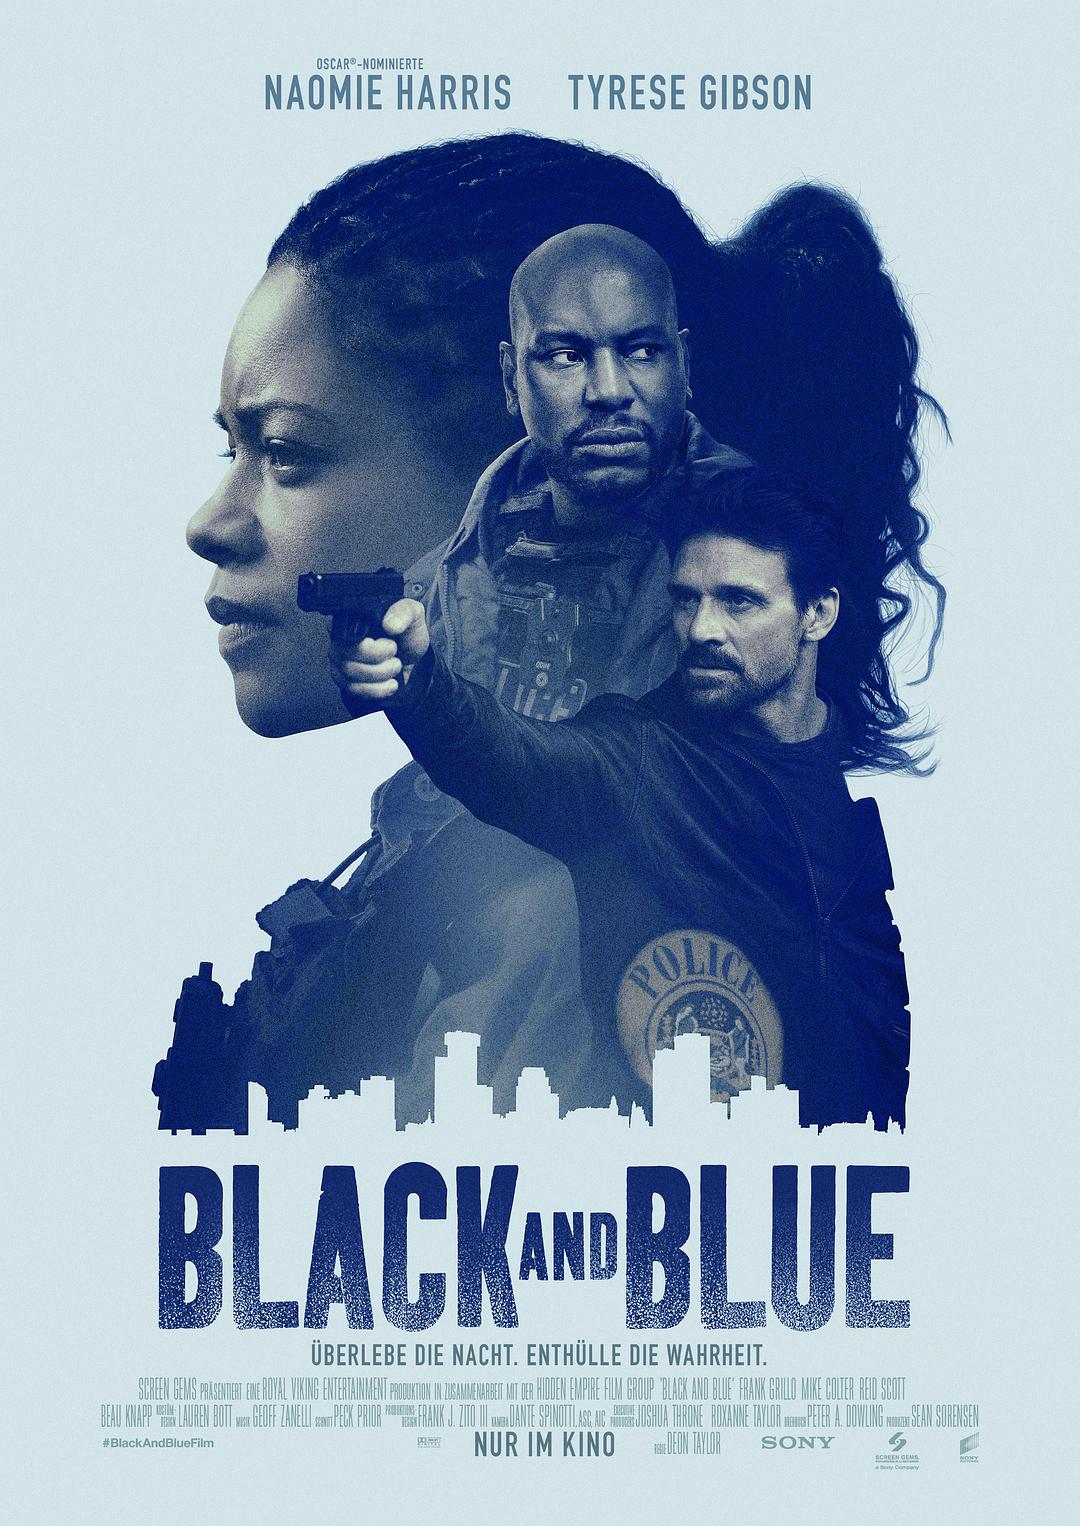  Black.and.Blue.2019.720p.BluRay.x264-AAA 4.37GB-1.png